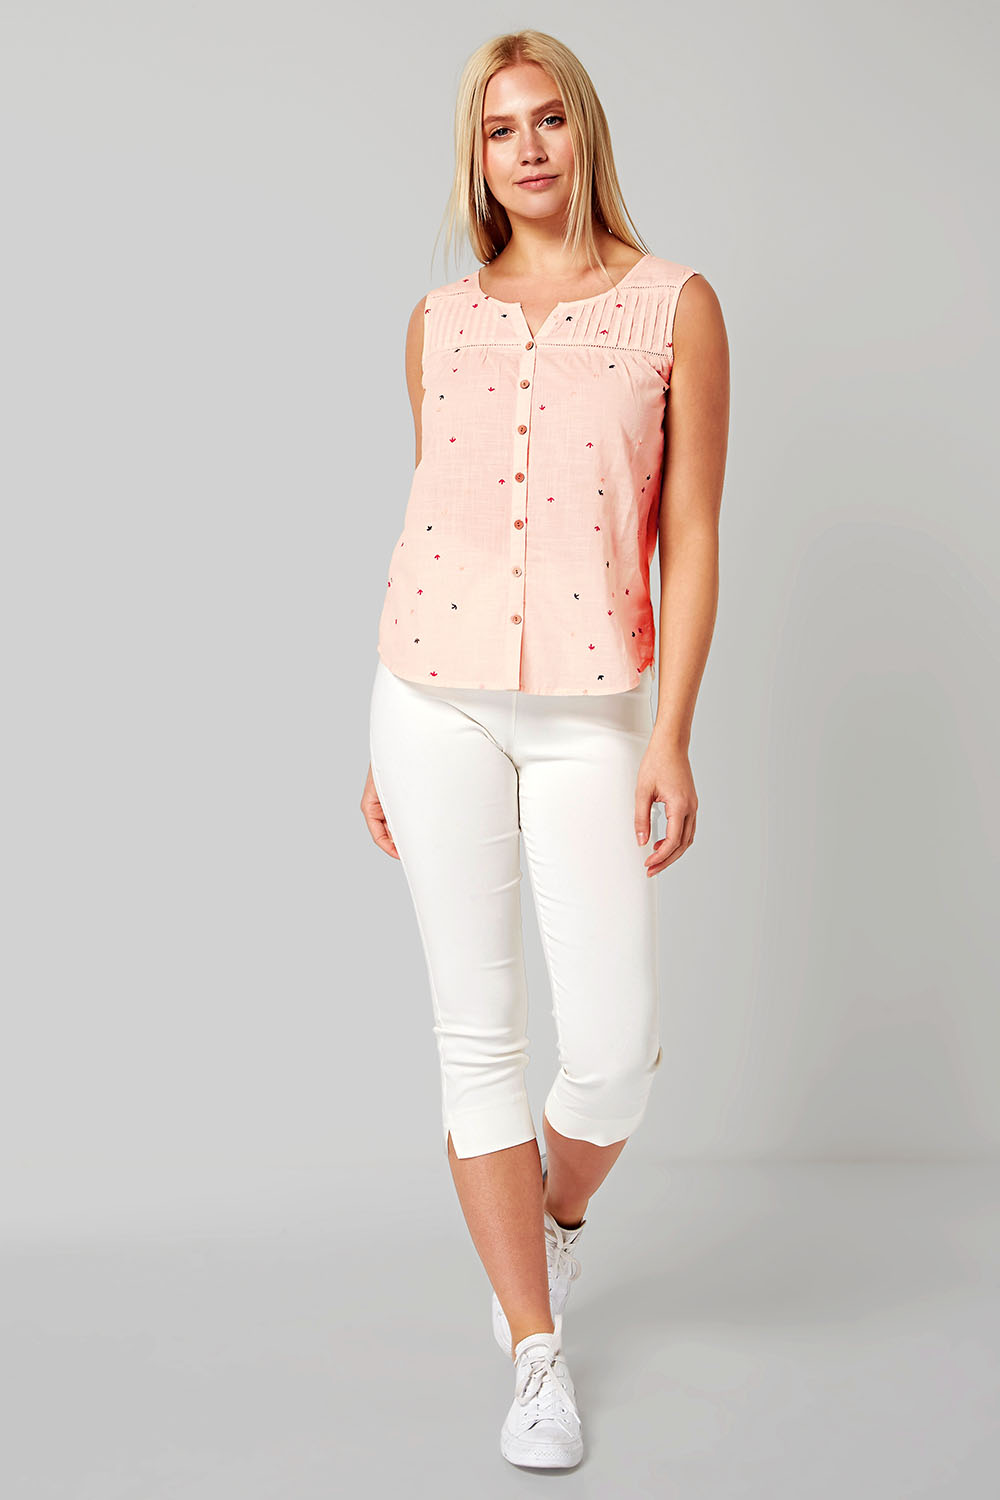 Light Pink Embroidered Sleeveless Button Blouse, Image 3 of 4